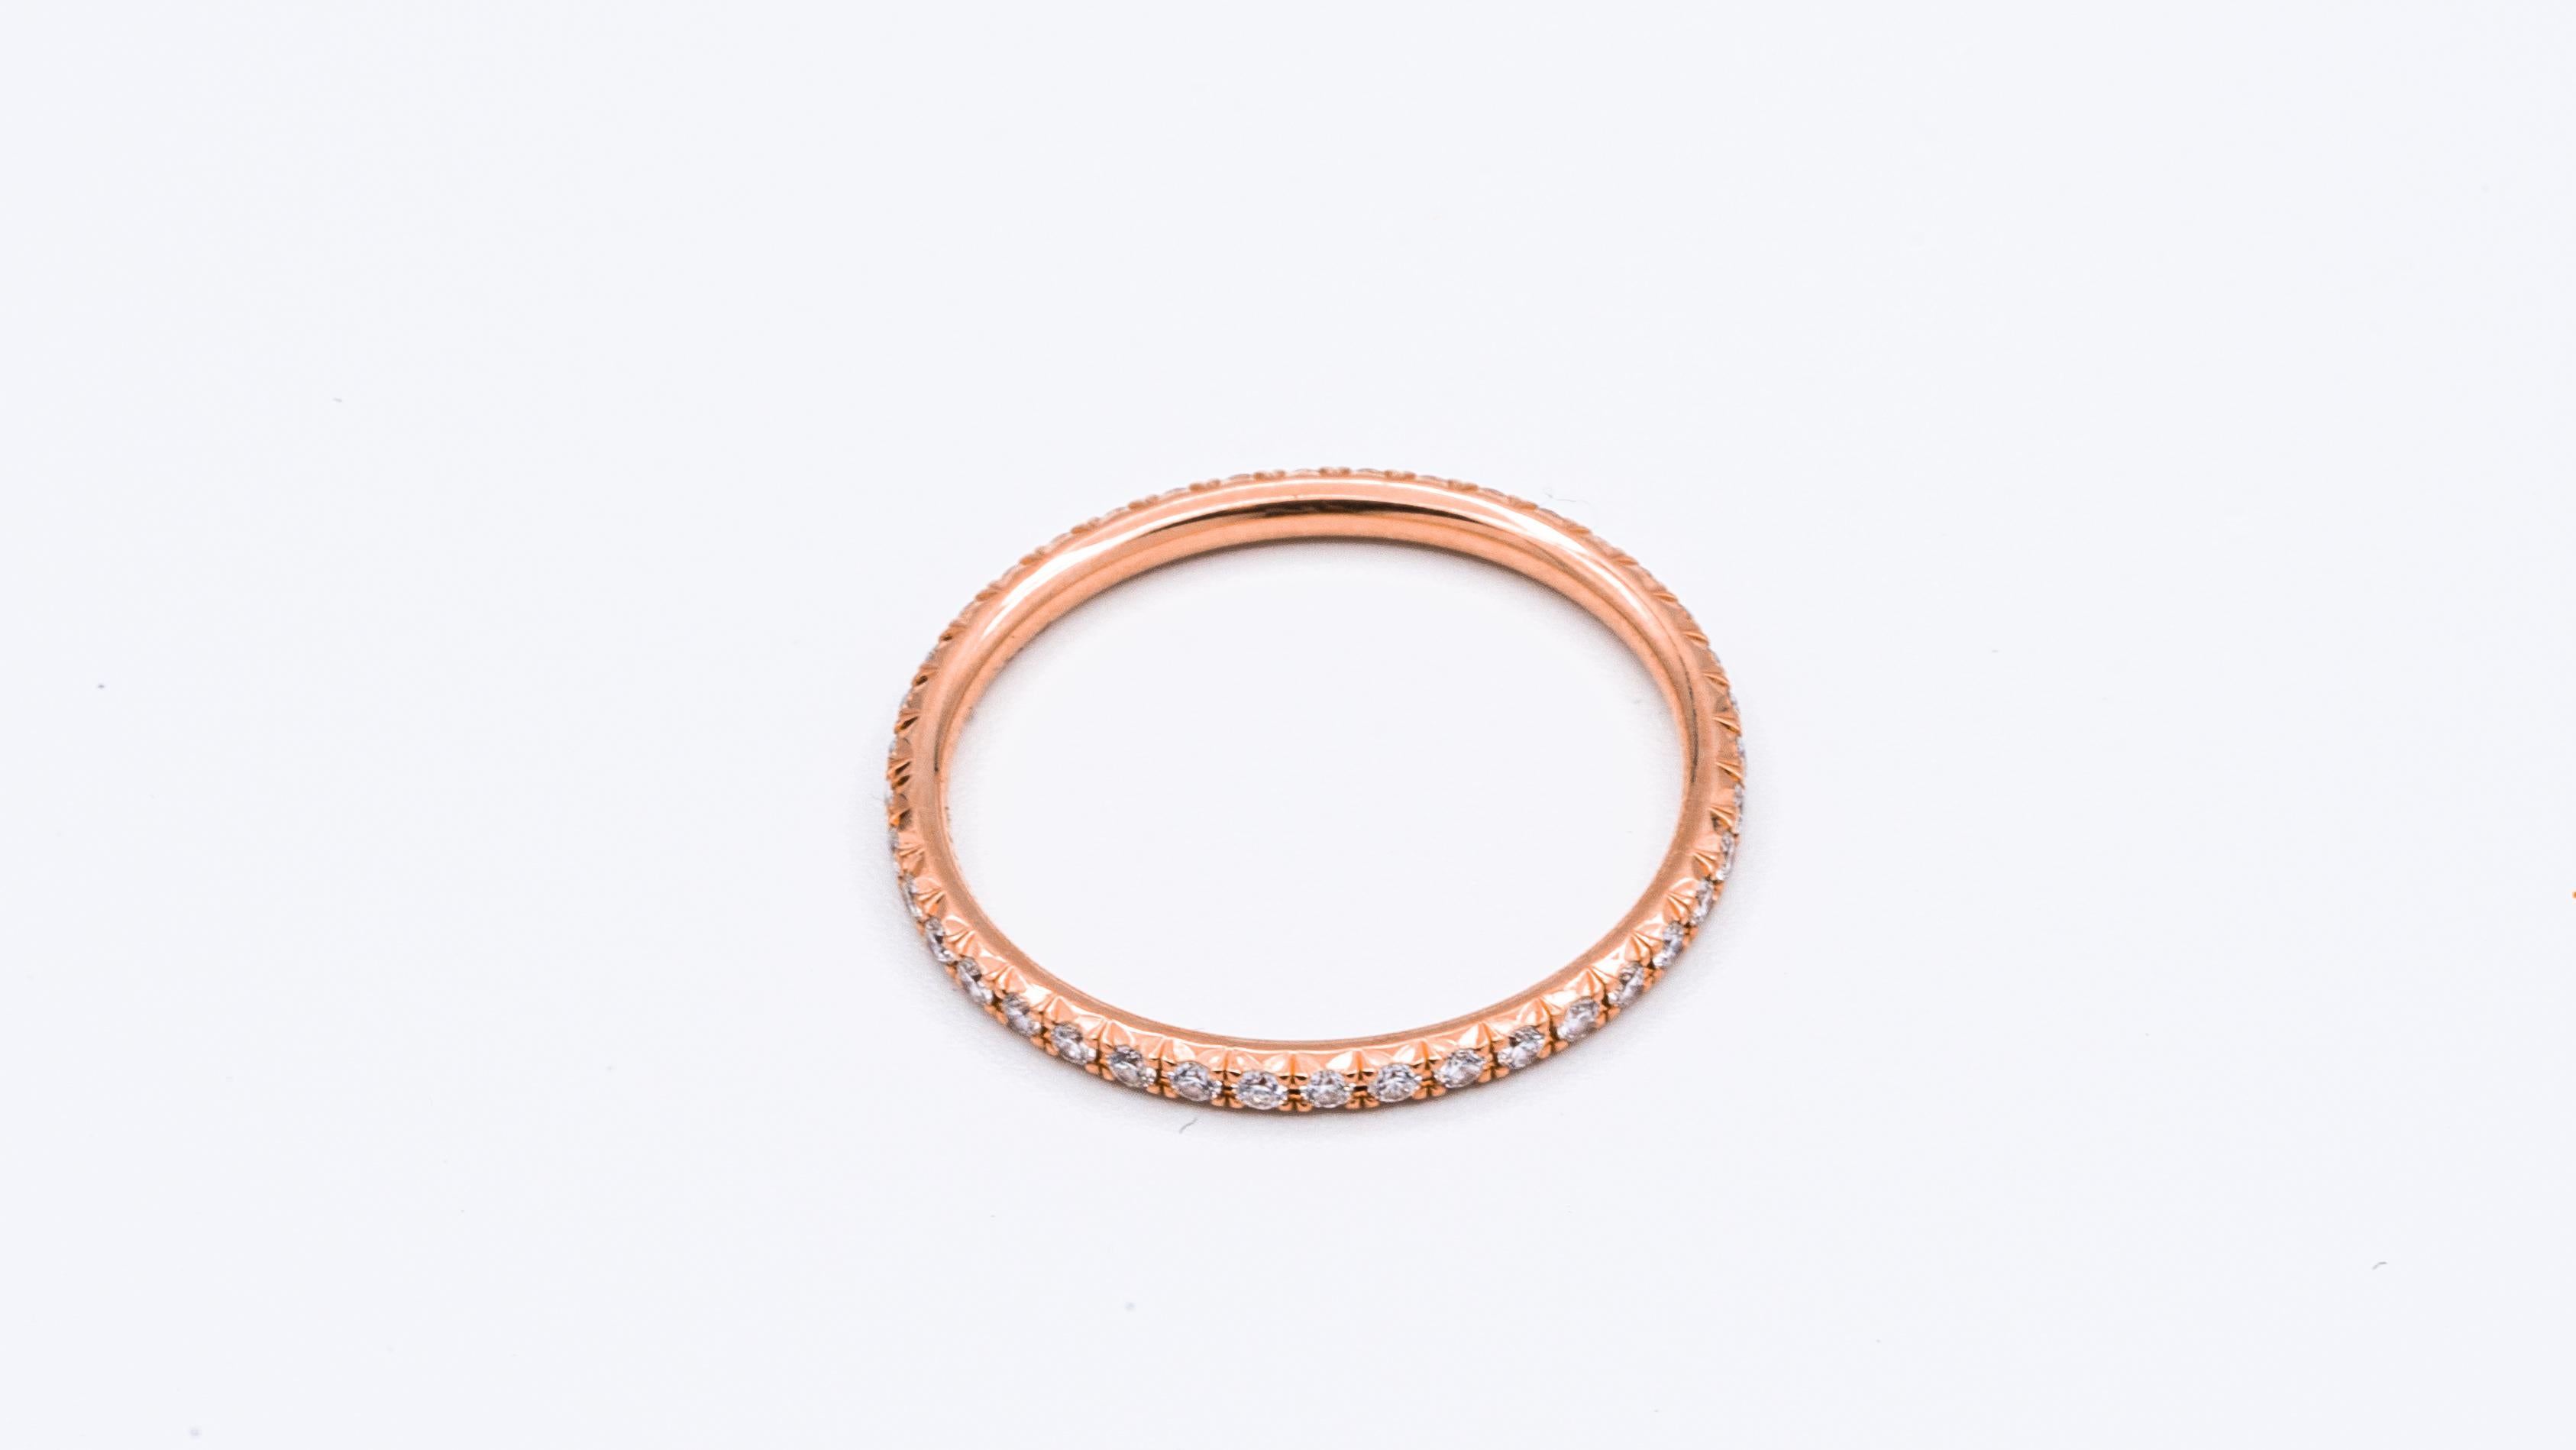 Tiffany & Co. Metro design diamond wedding band finely crafted in 18 Karat rose gold with 40 round brilliant cut diamonds weighing approximately 0.20 carats total weight. F color , VVS clarity 

Stamp: Tiffany & Co. AU 750, BELGIUM
Size: 5

Original